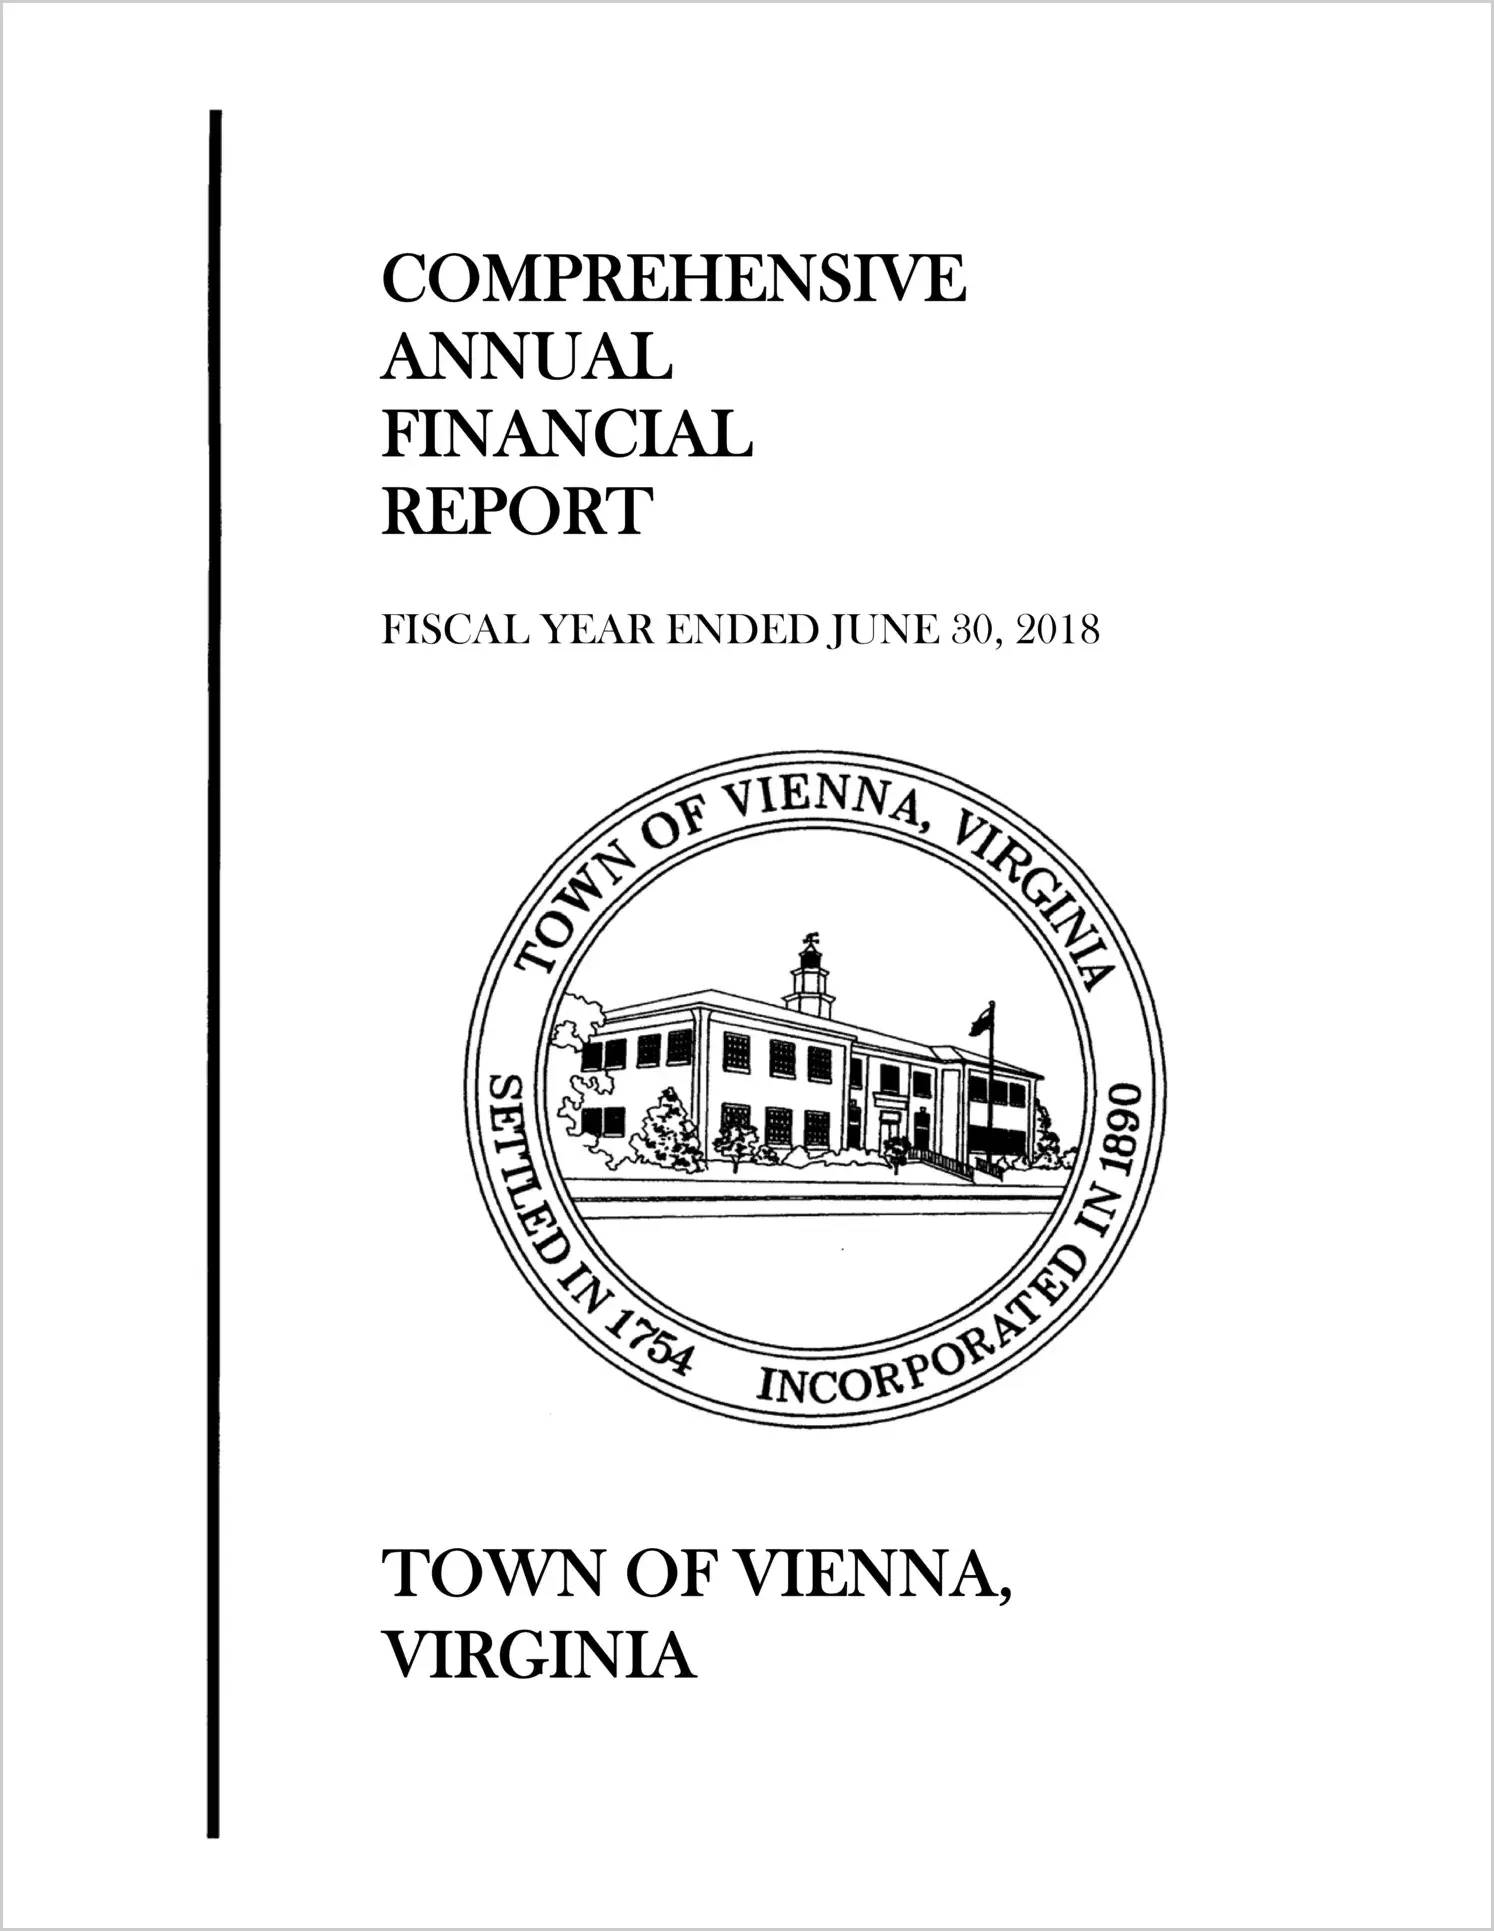 2018 Annual Financial Report for Town of Vienna